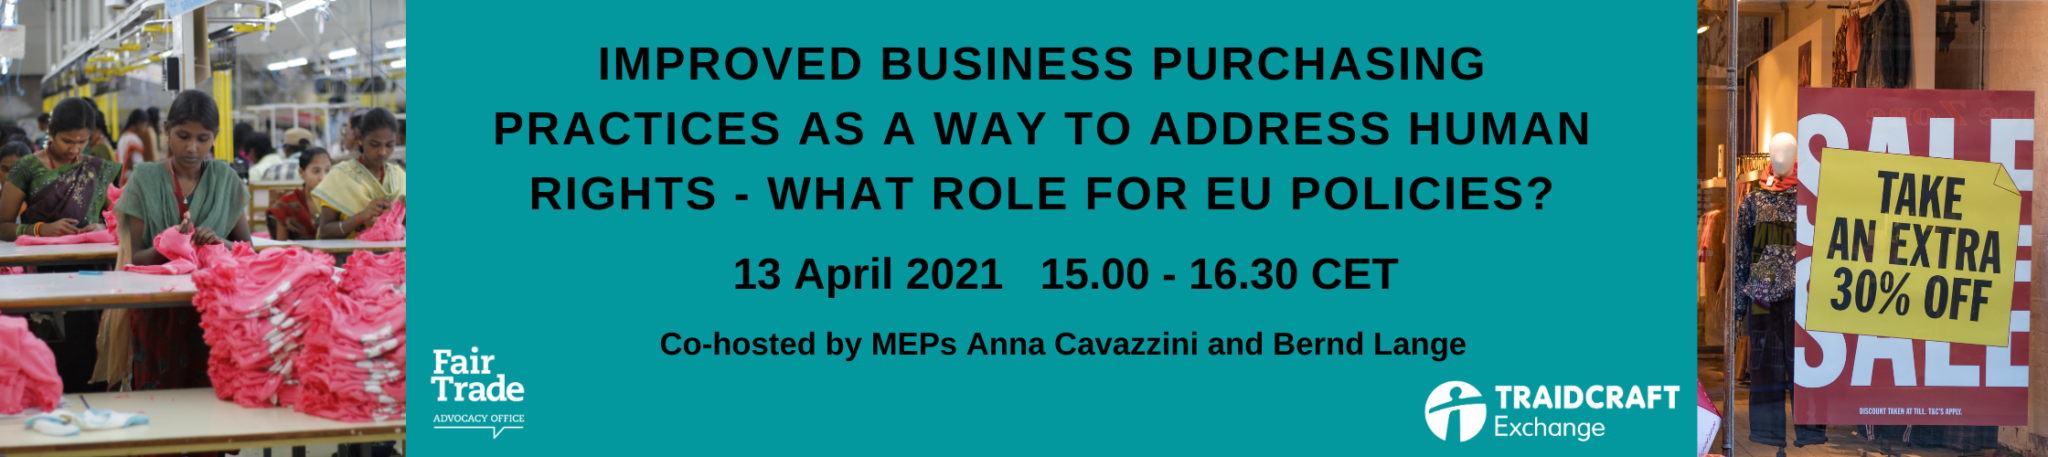 Online Event: Improved business Purchasing Practices as a way to address Human Rights - What role for EU policies?